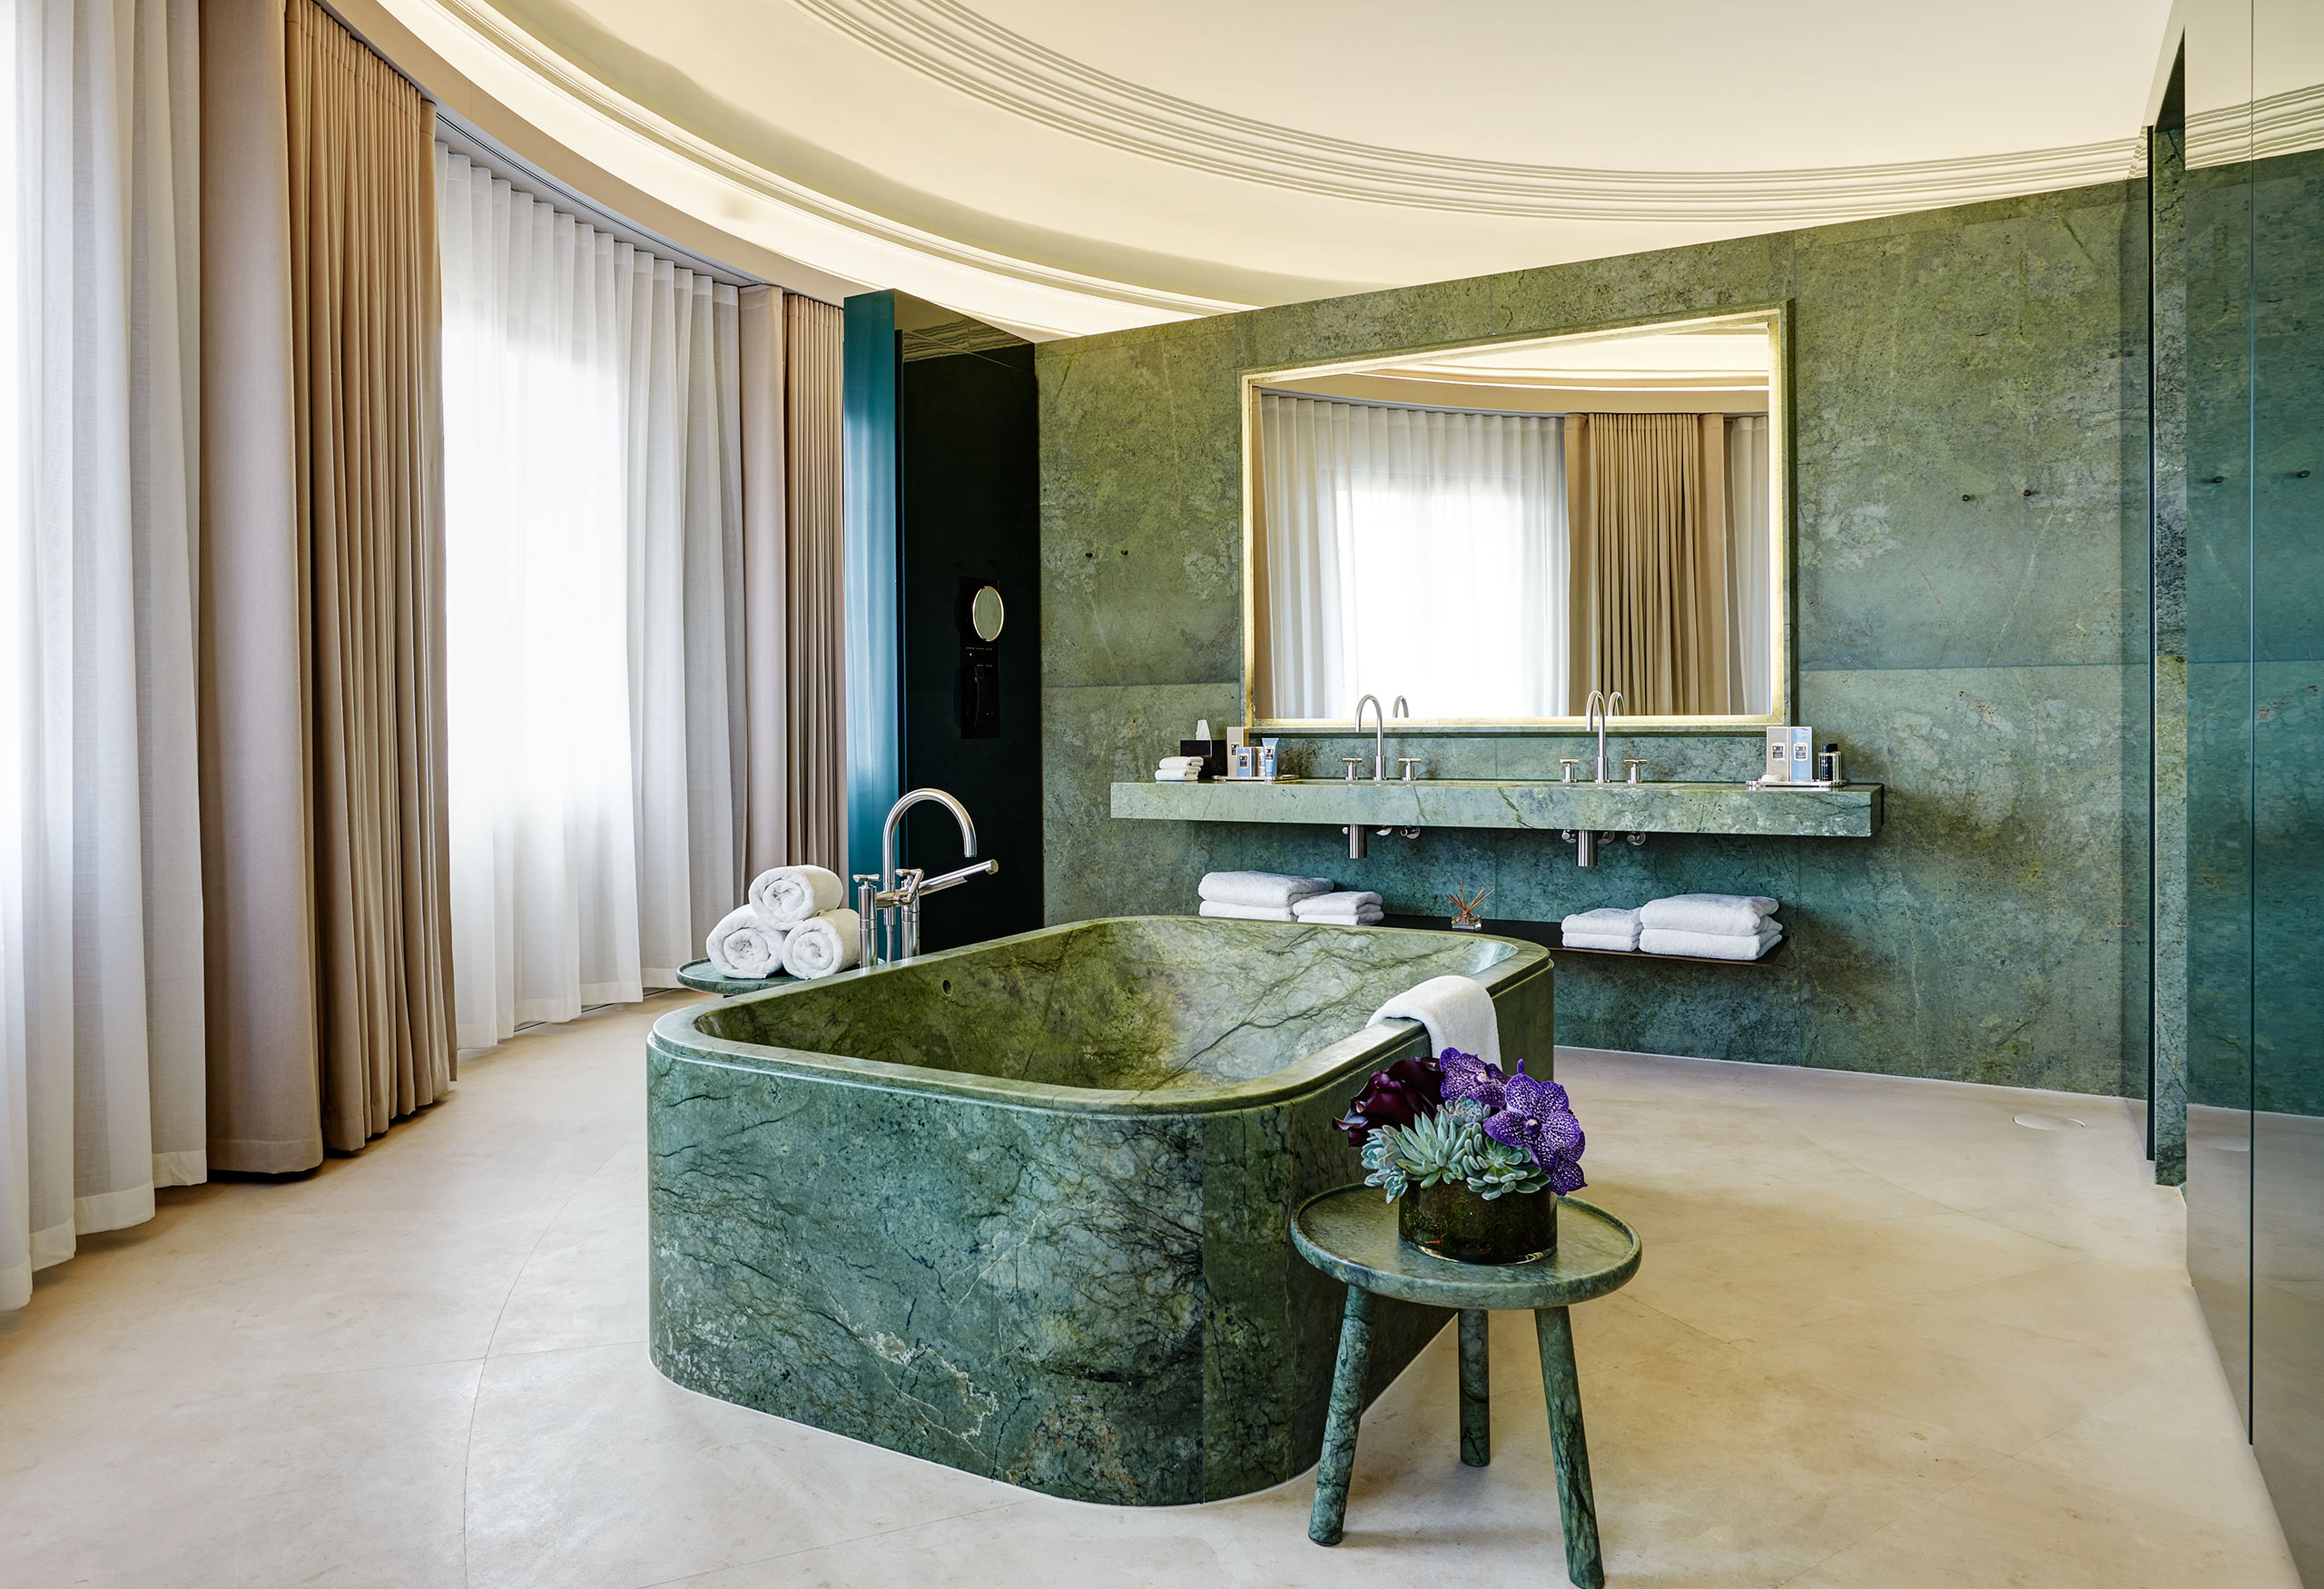 The free-standing marble bath in the Dome Suite